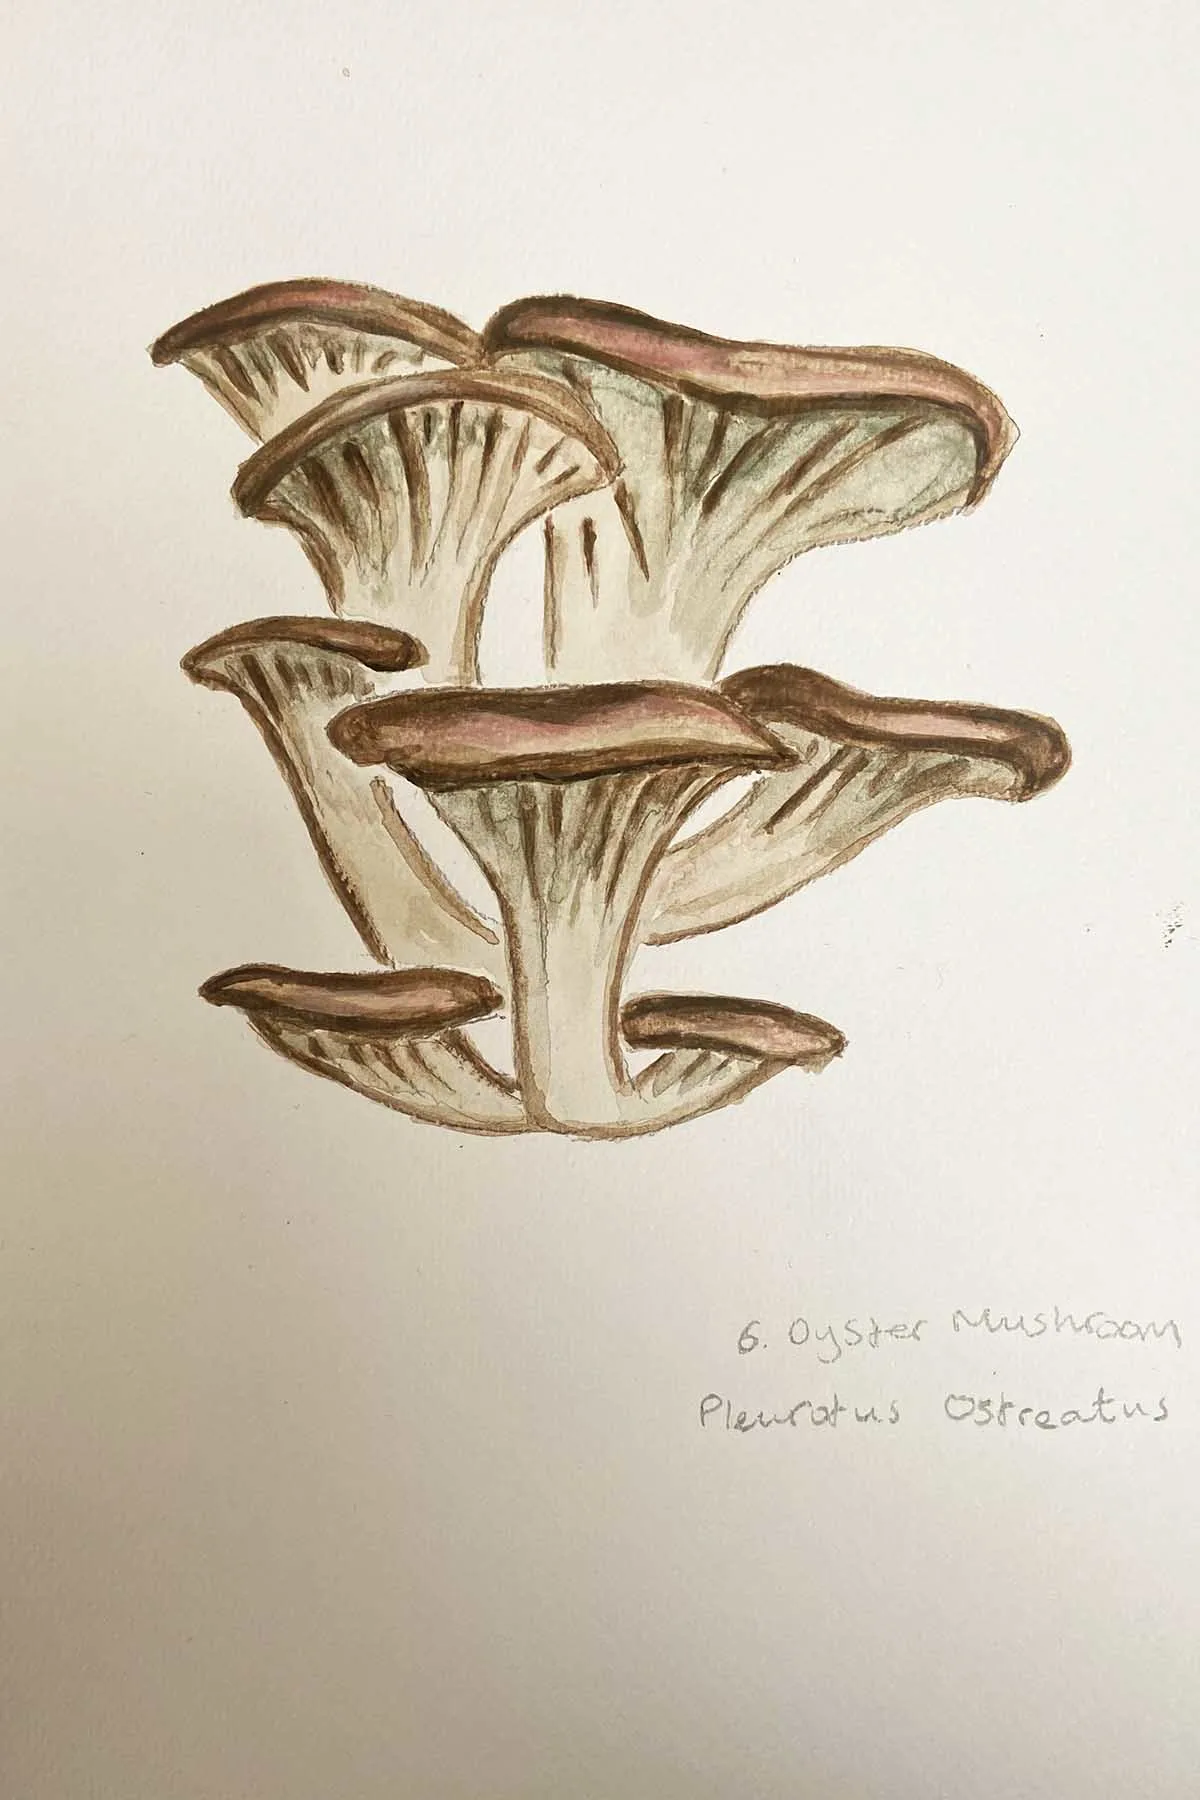 Painted oyster mushroom drawing